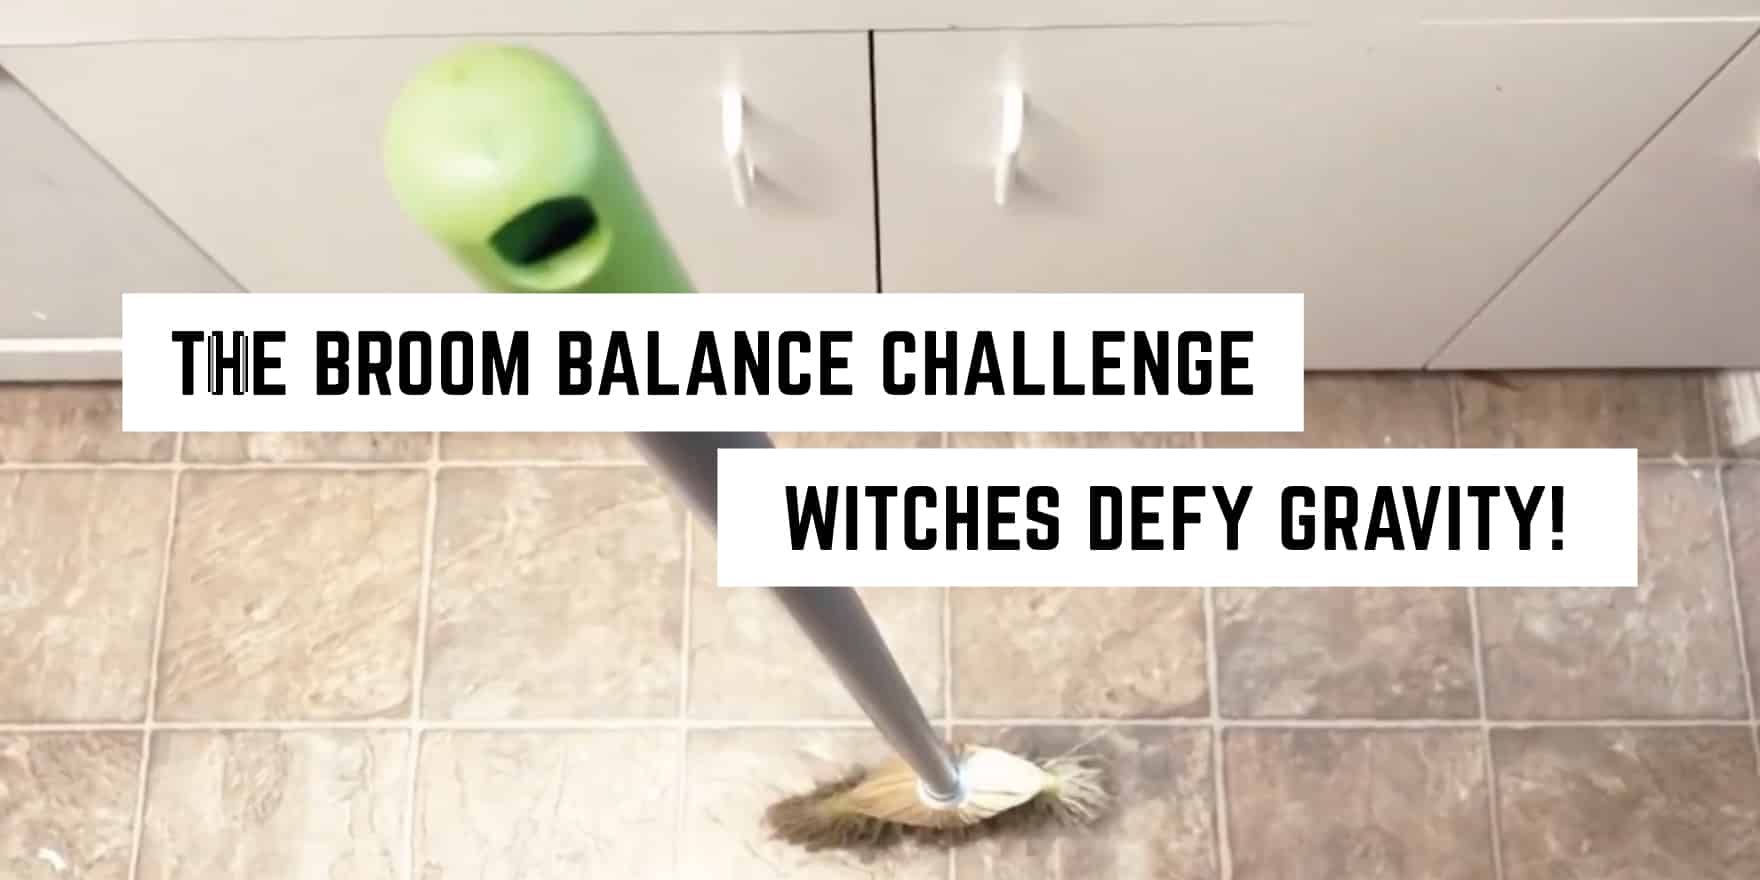 Witches defy gravity this Summer Solstice with the Broom Balance Challenge